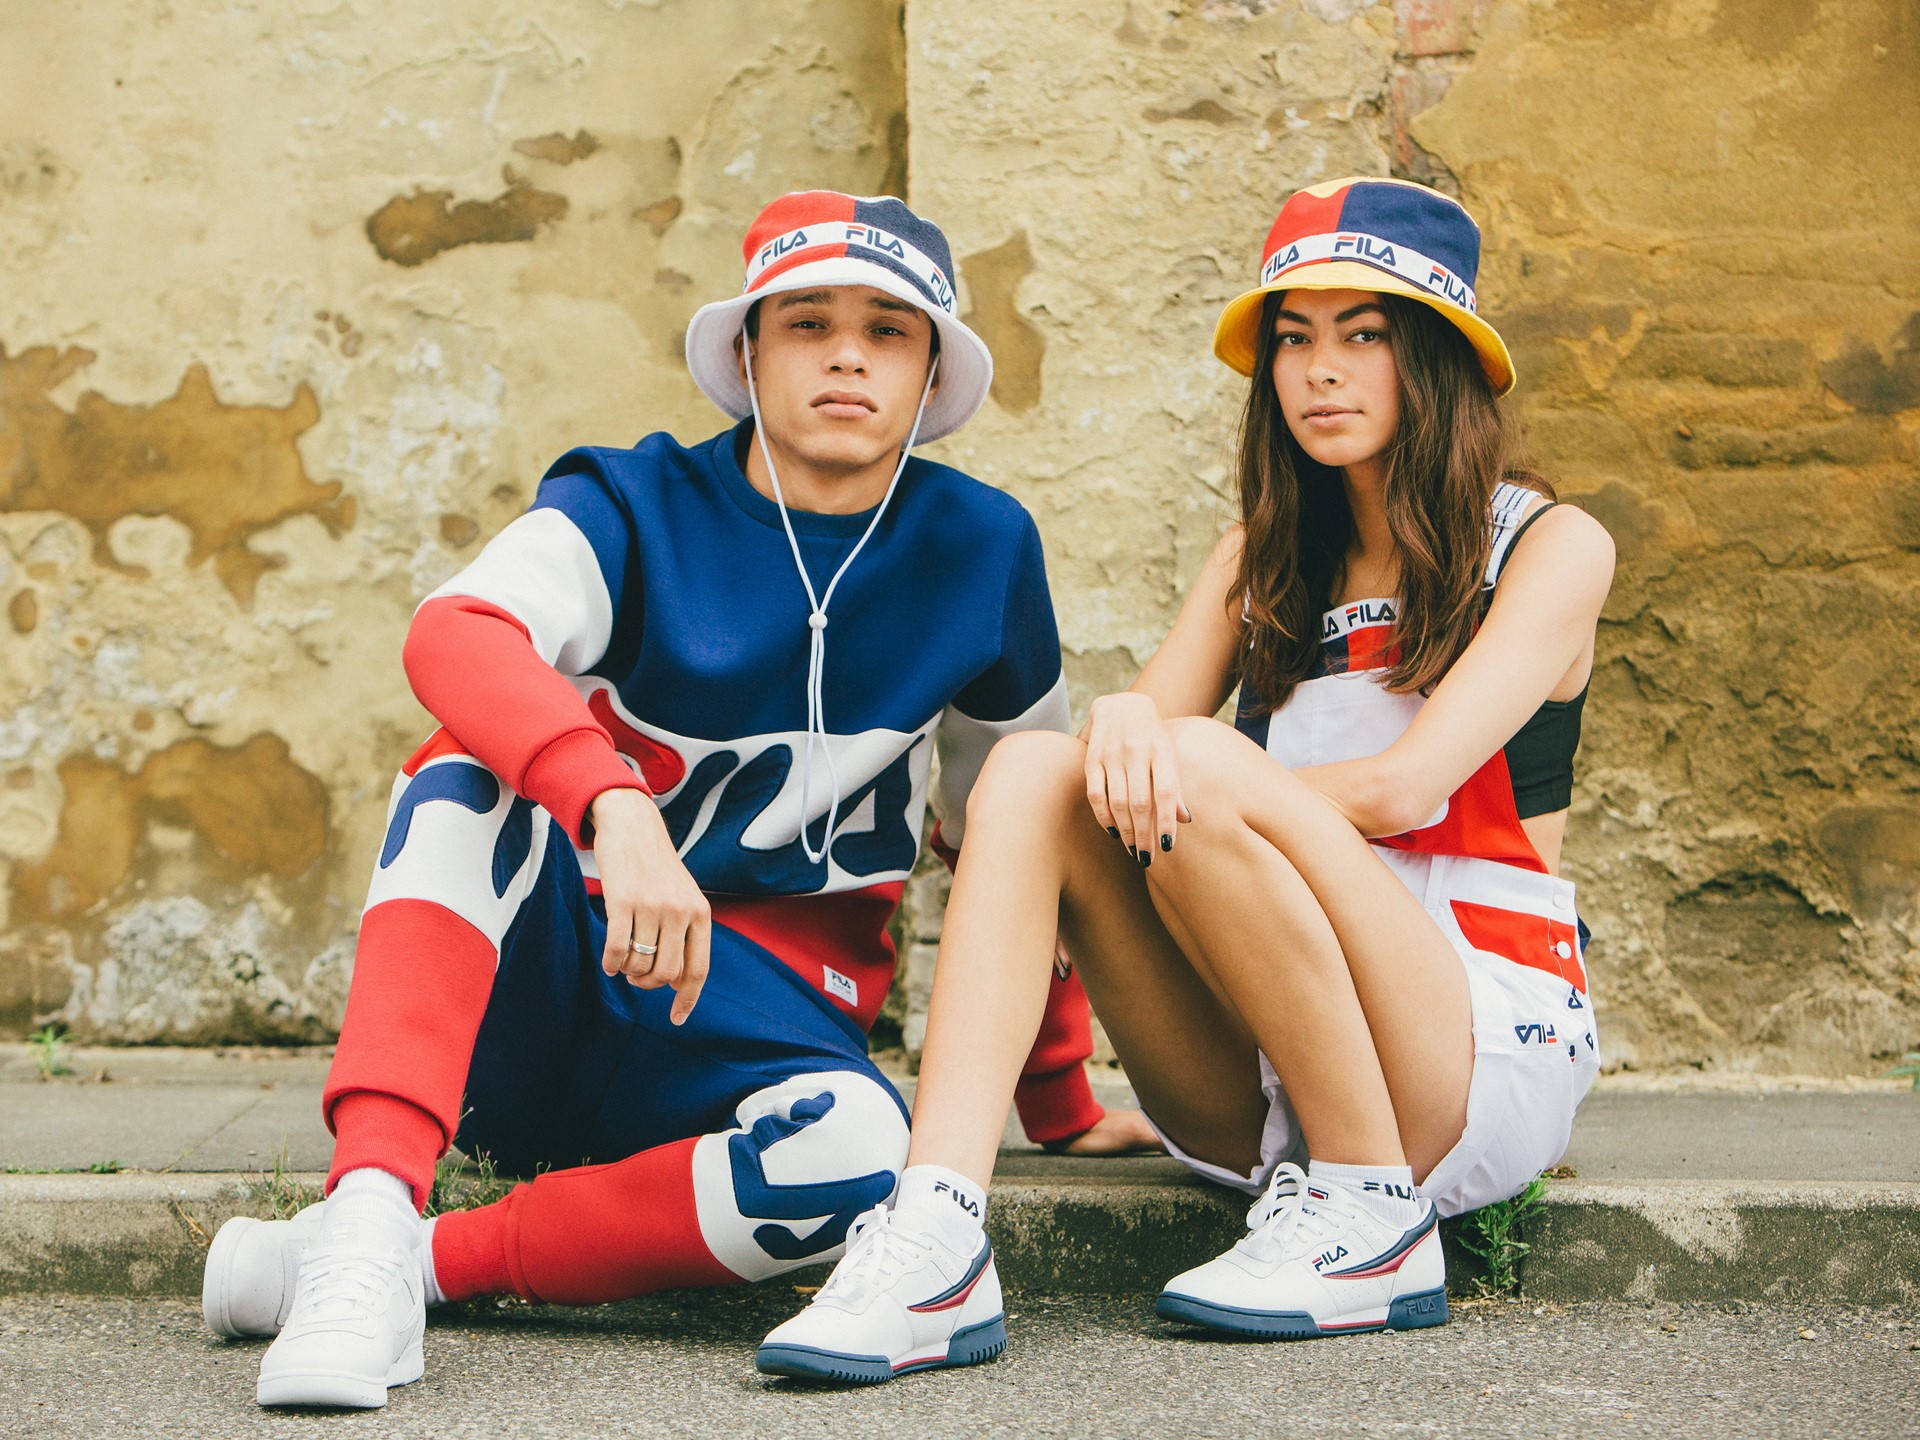 Download Fila Couple Outfit Wallpaper | Wallpapers.com